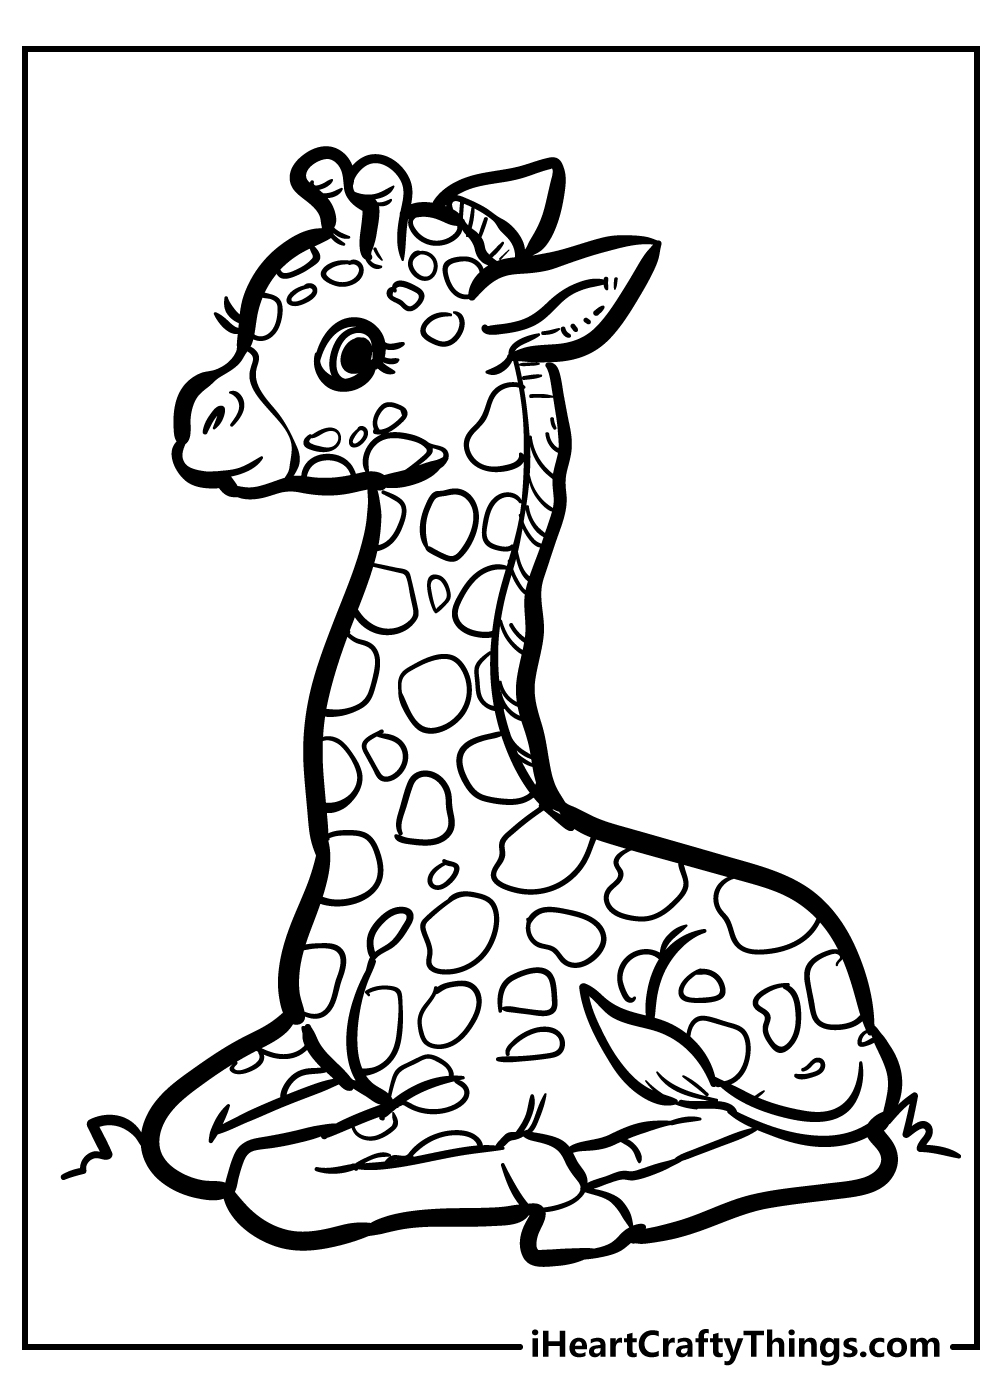 Giraffe Coloring Pages Updated 20